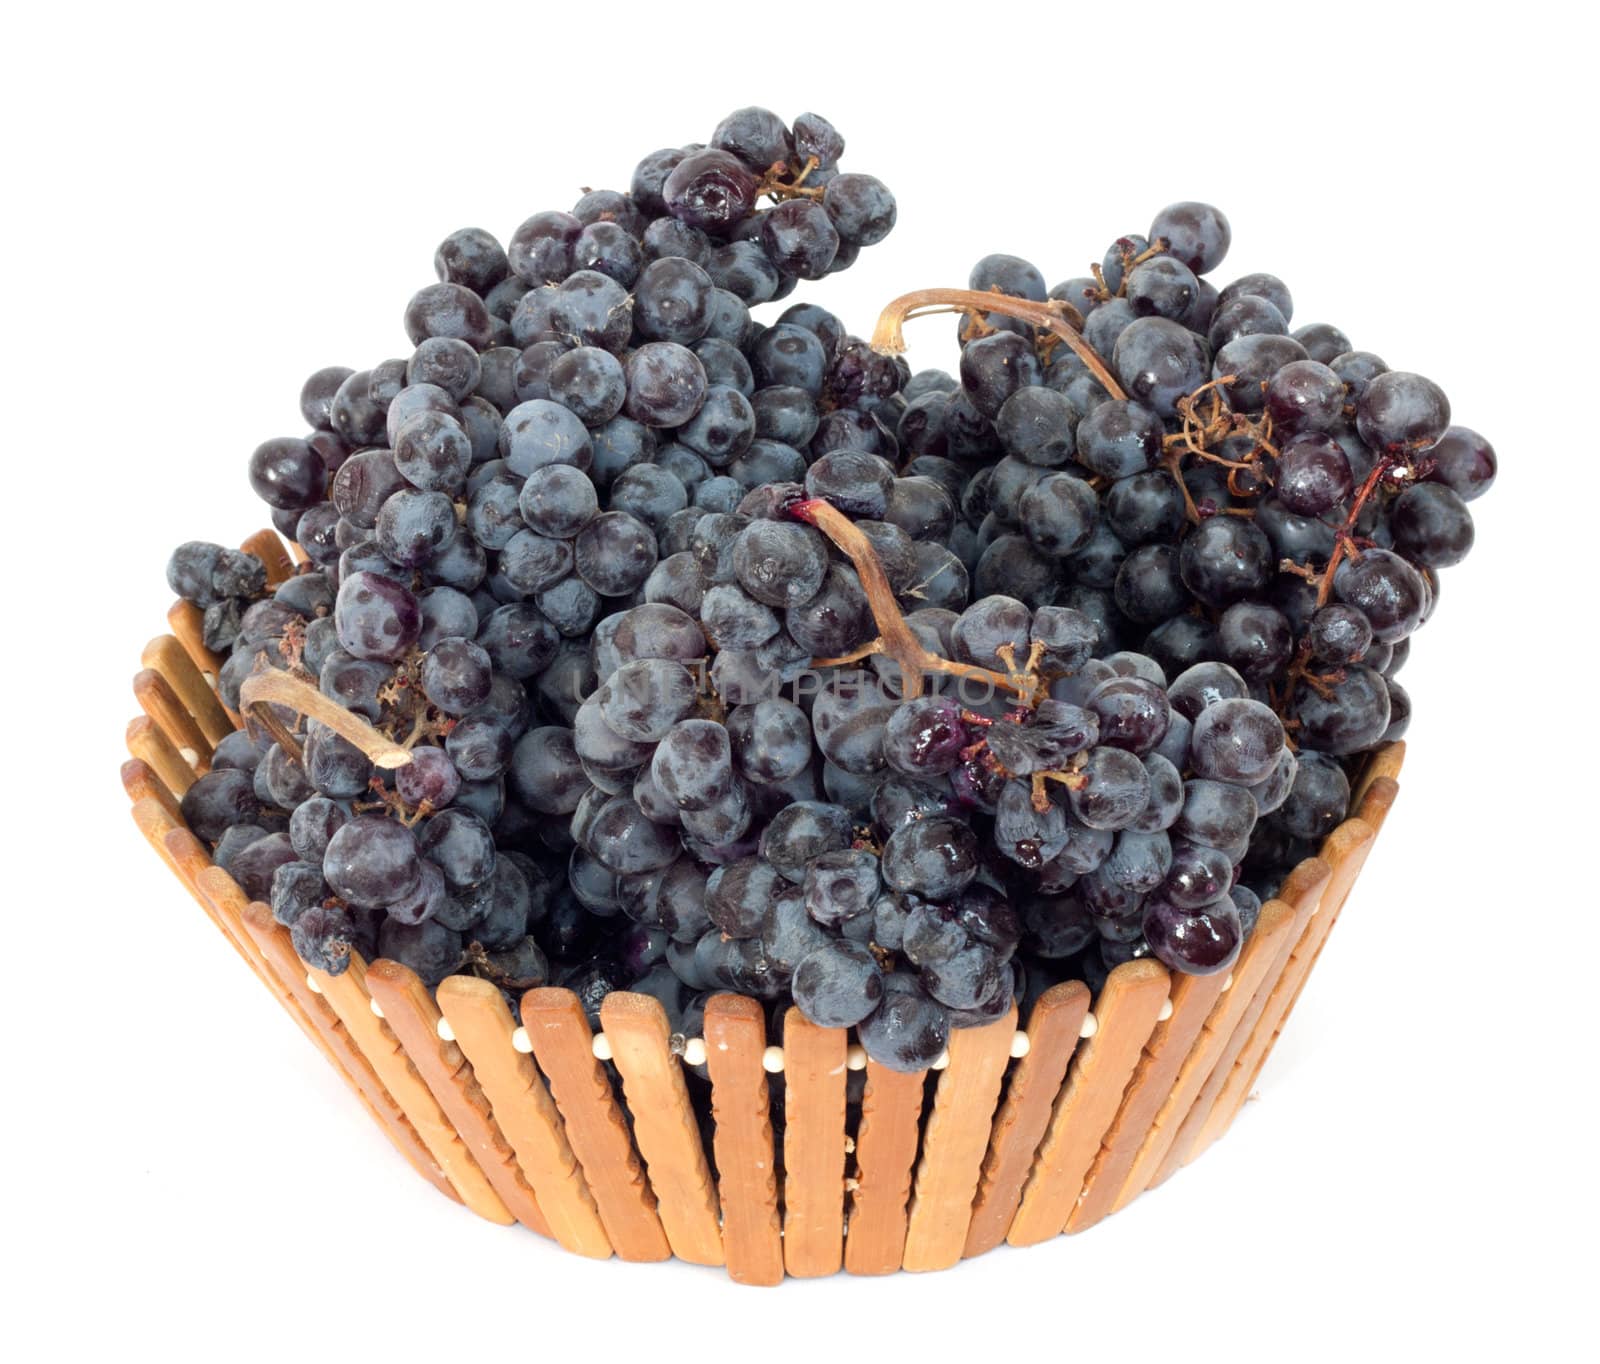 black grapes in a basket on a white background by schankz